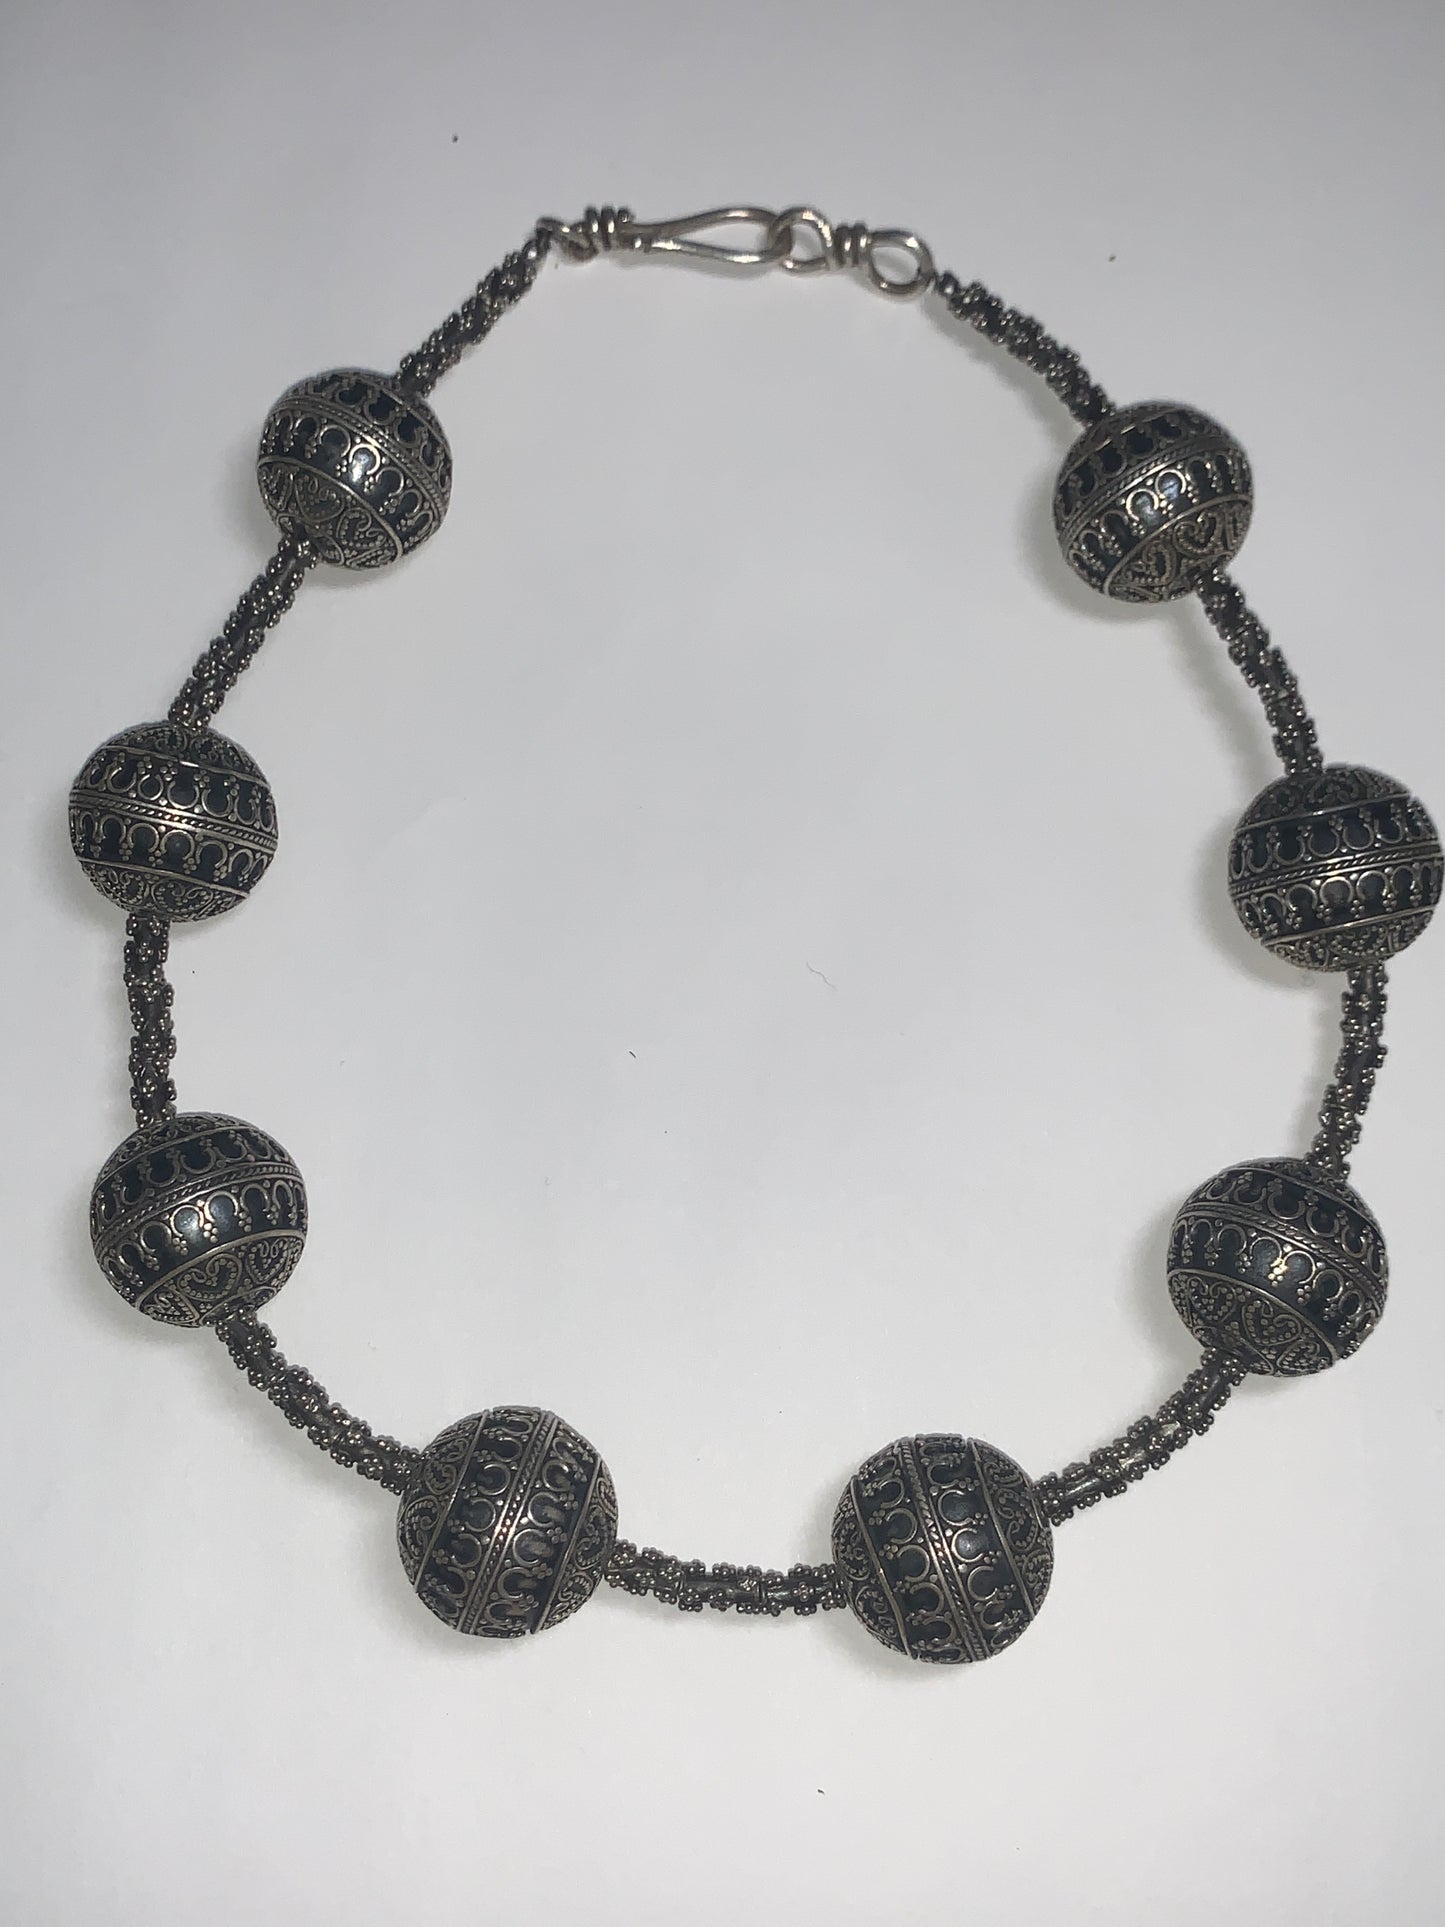 Gorgeous Granulated Balinese Necklace by Jenn